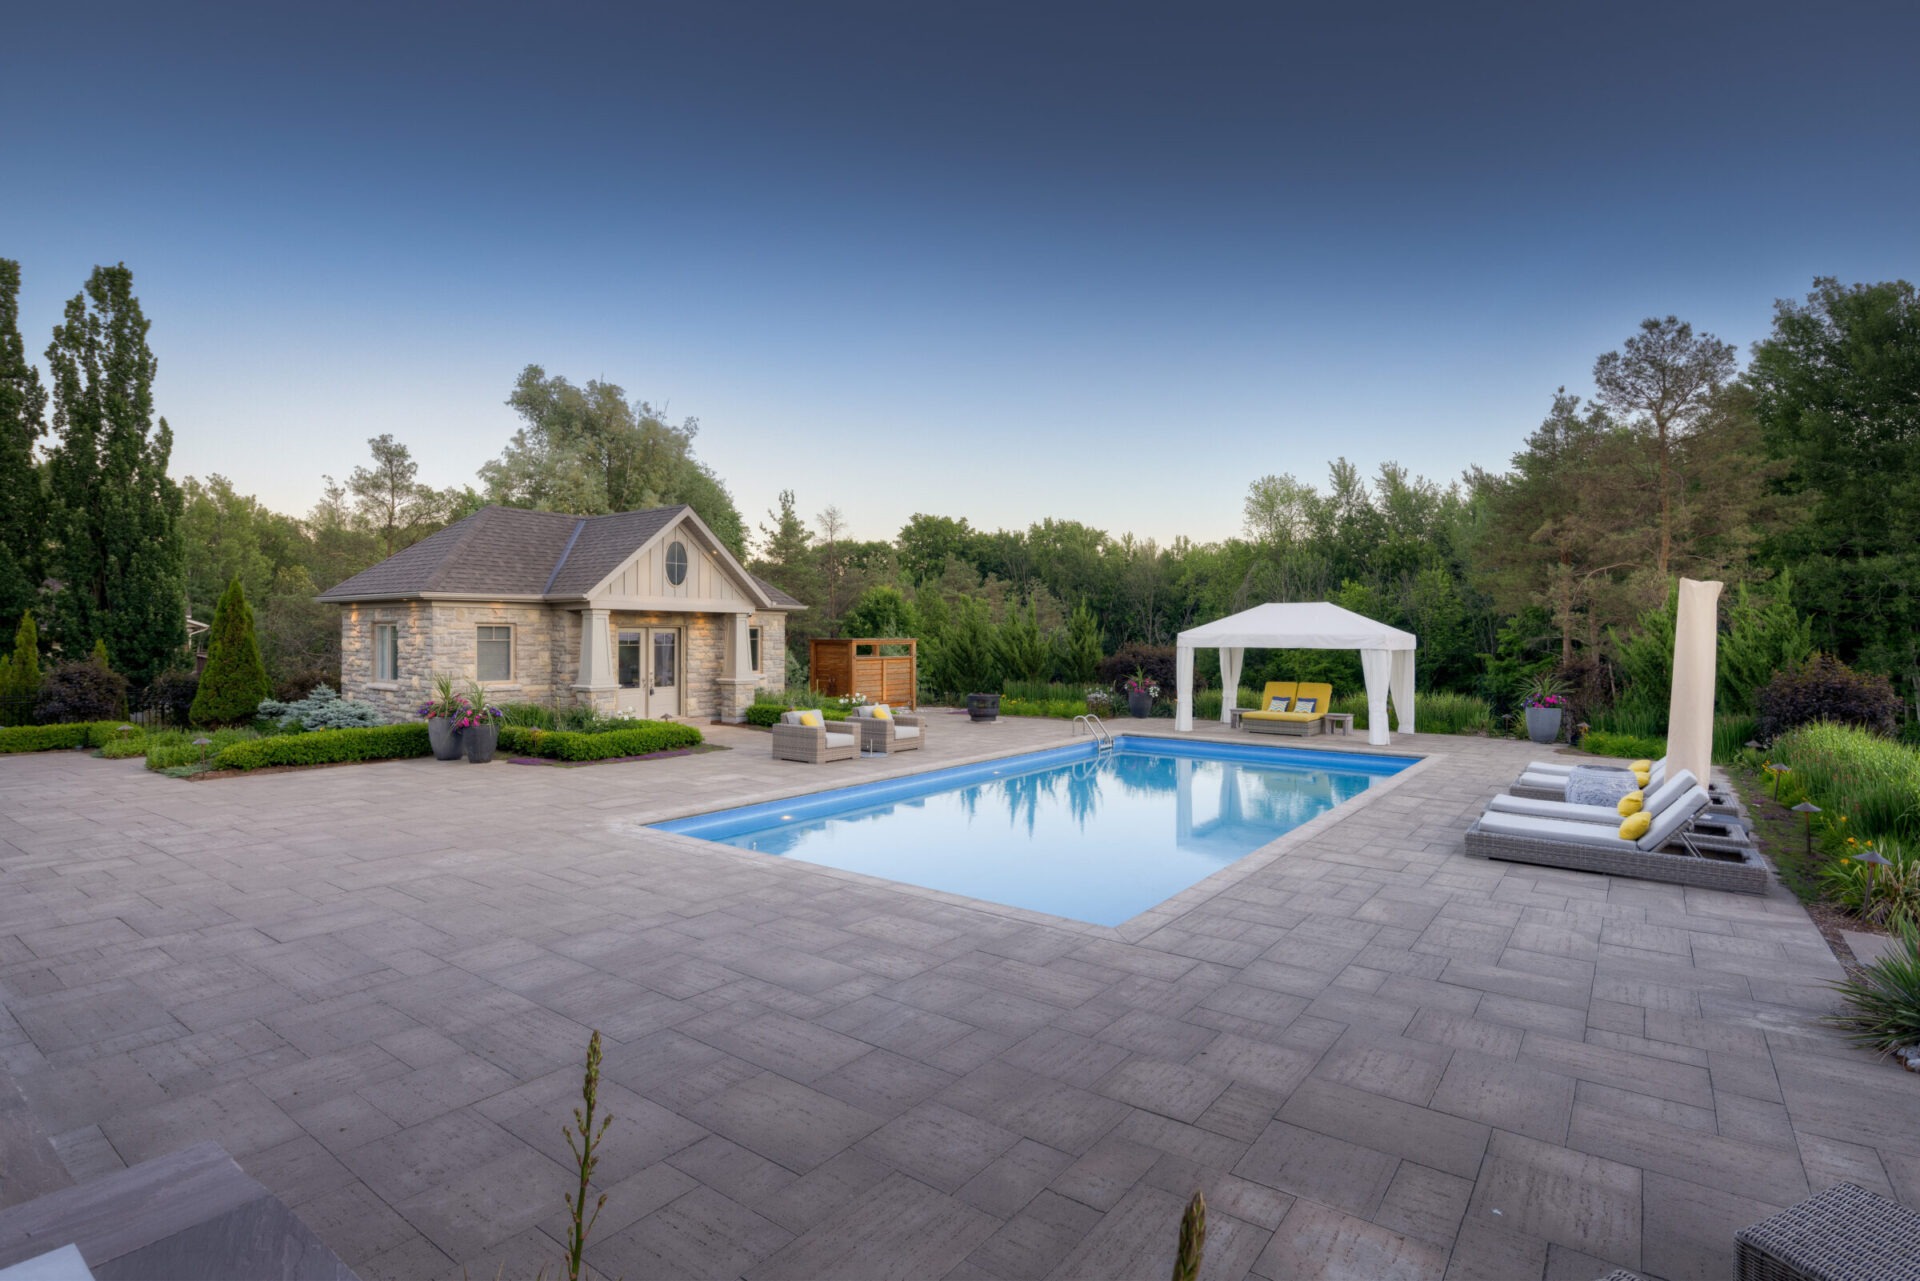 A tranquil backyard setting with a swimming pool, stone patio, cozy pool house, verdant garden, gazebo, and clear blue sky at dusk.